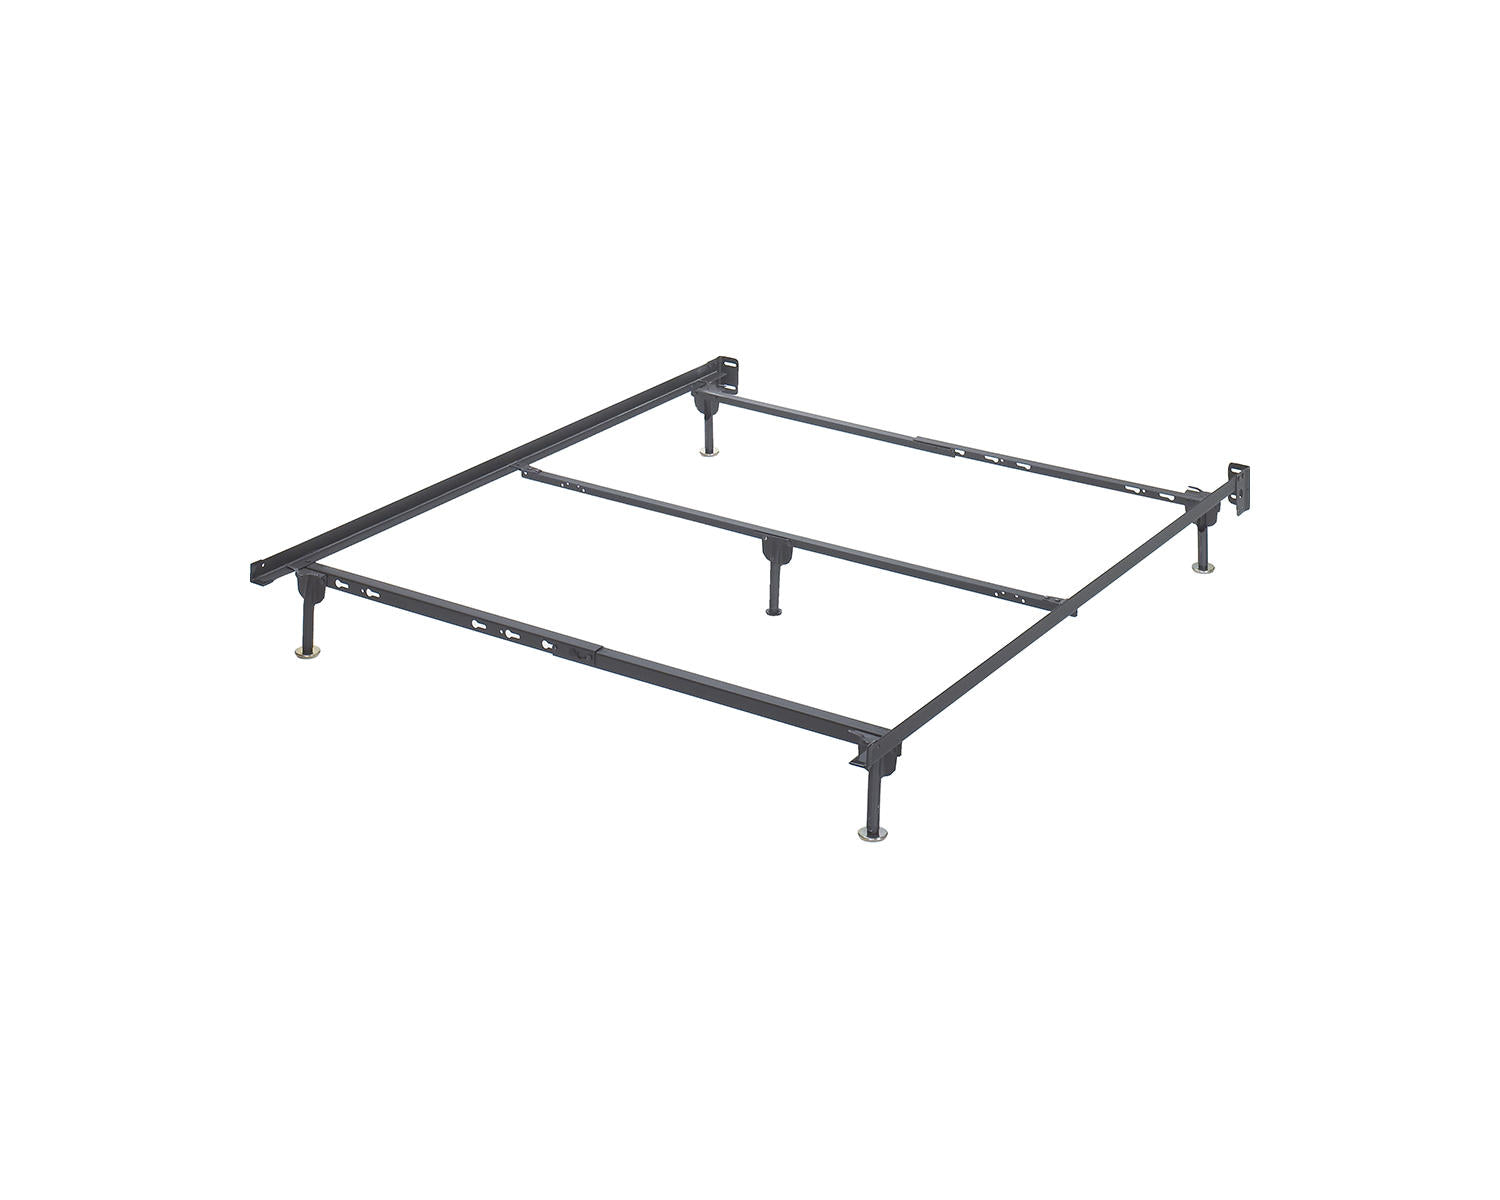 Ashley Signature Design Frames and Rails Queen Bolt on Bed Frame Black/Gray B100-31